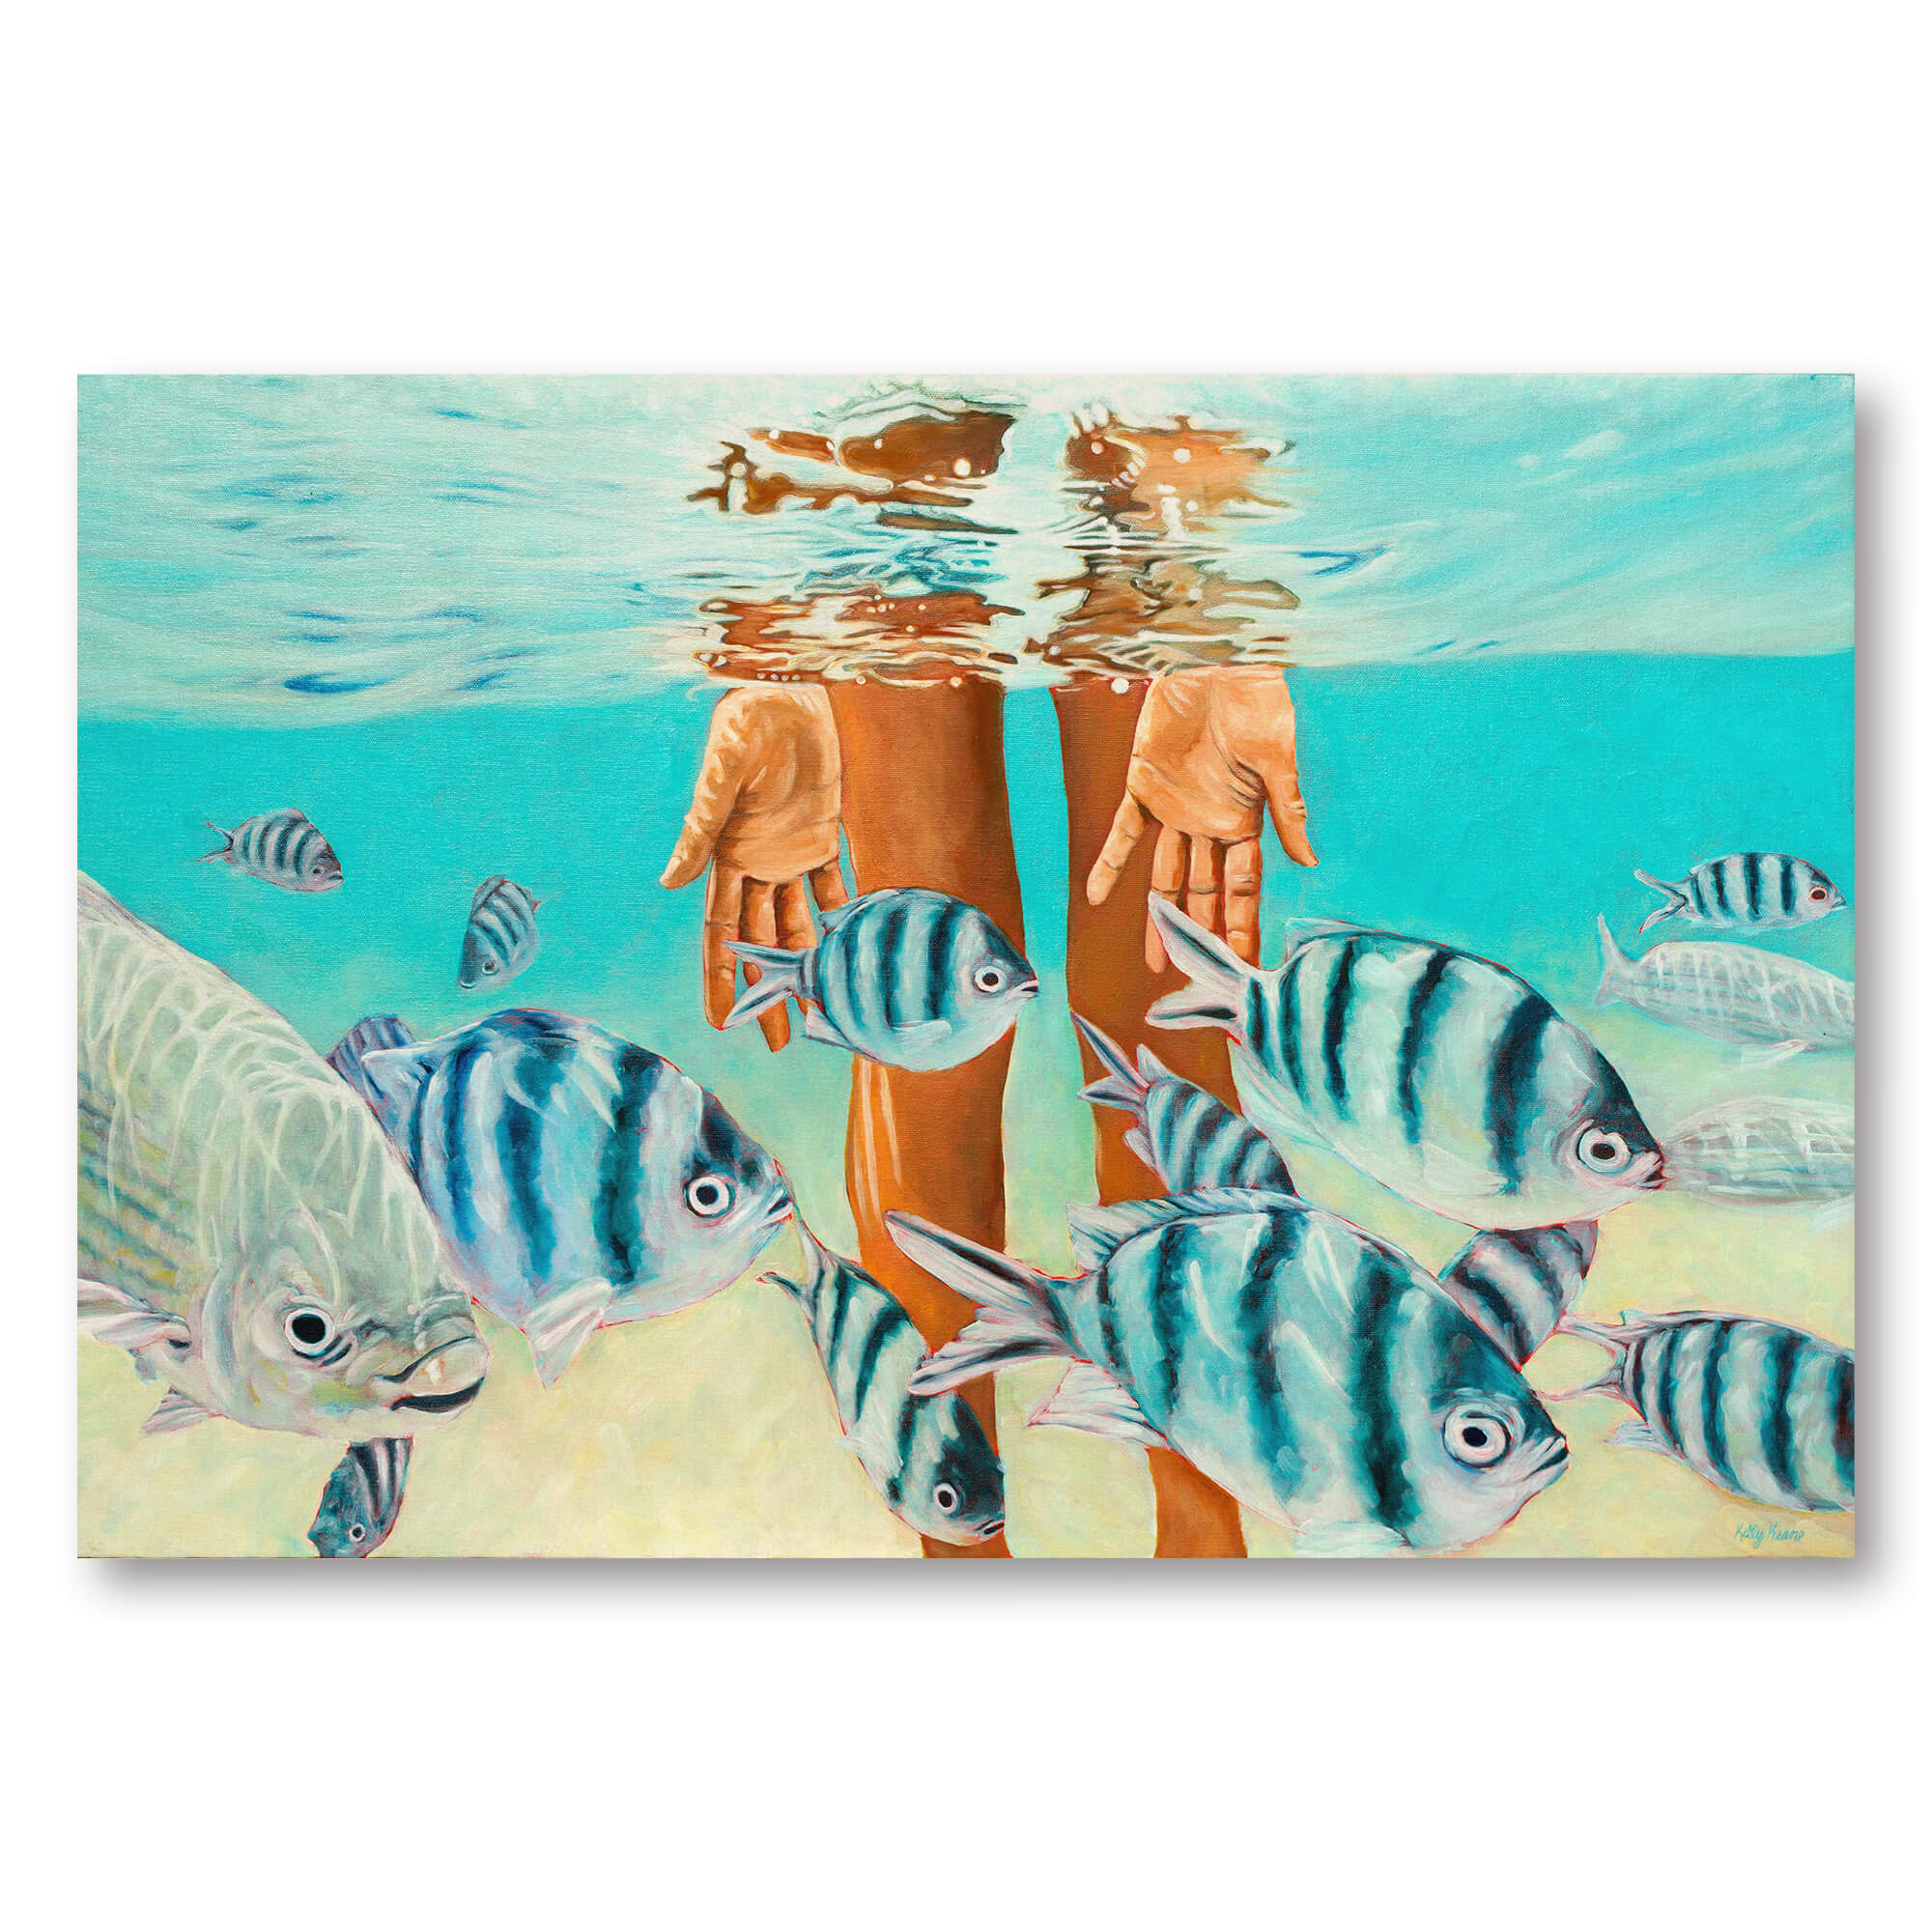 Wood art print of a person playing with some fish underwater by Hawaii artist Kelly Keane